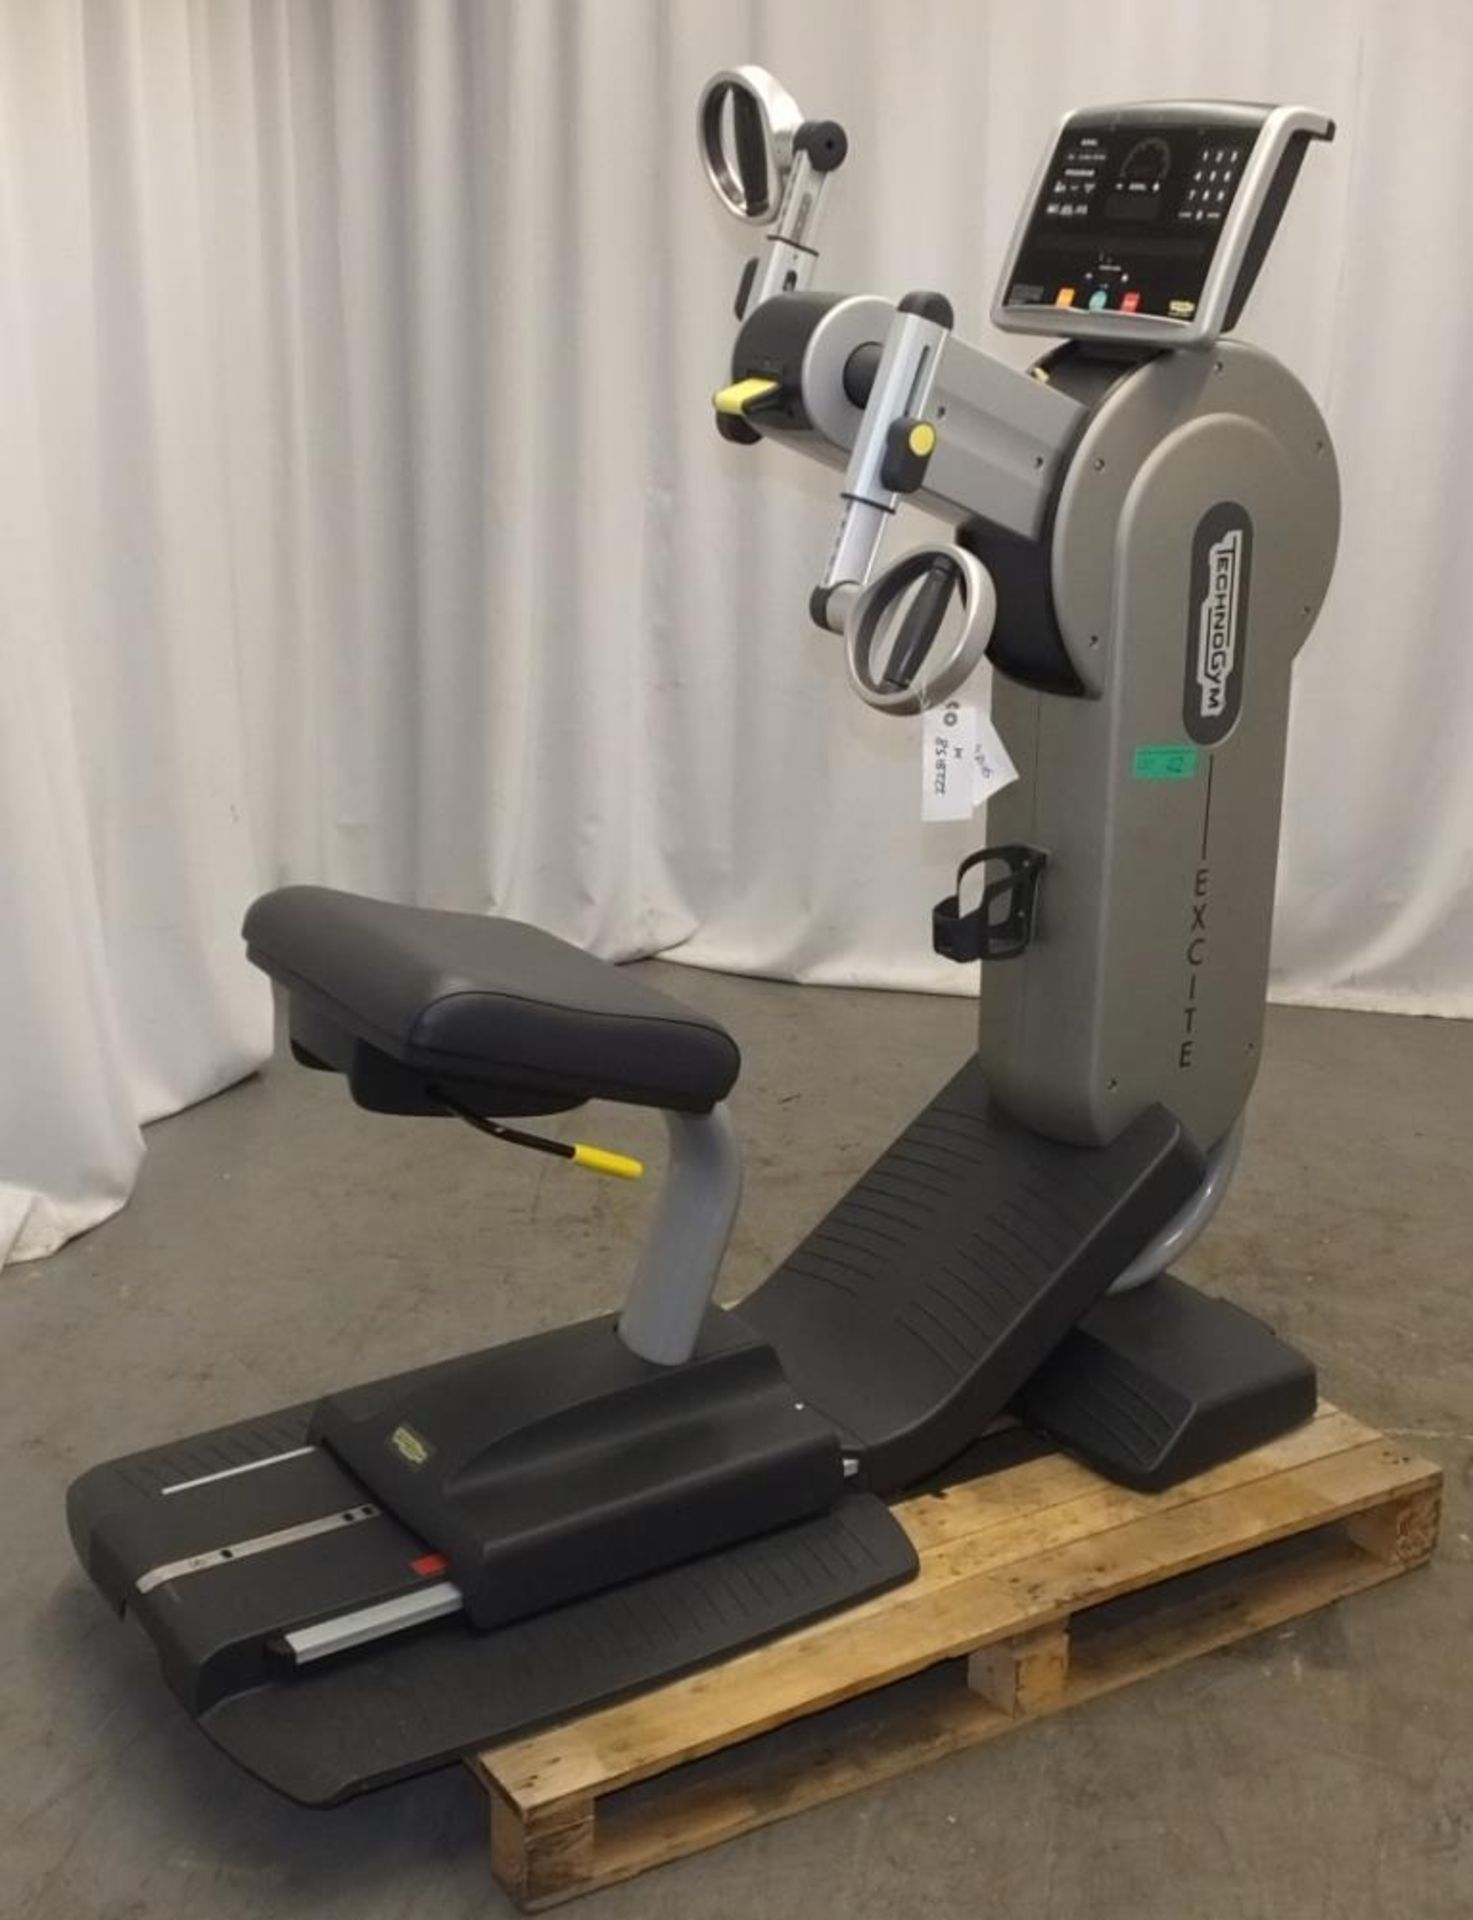 Technogym Excite 700 SP Hand Exercise Bike - powers up - functionality untested